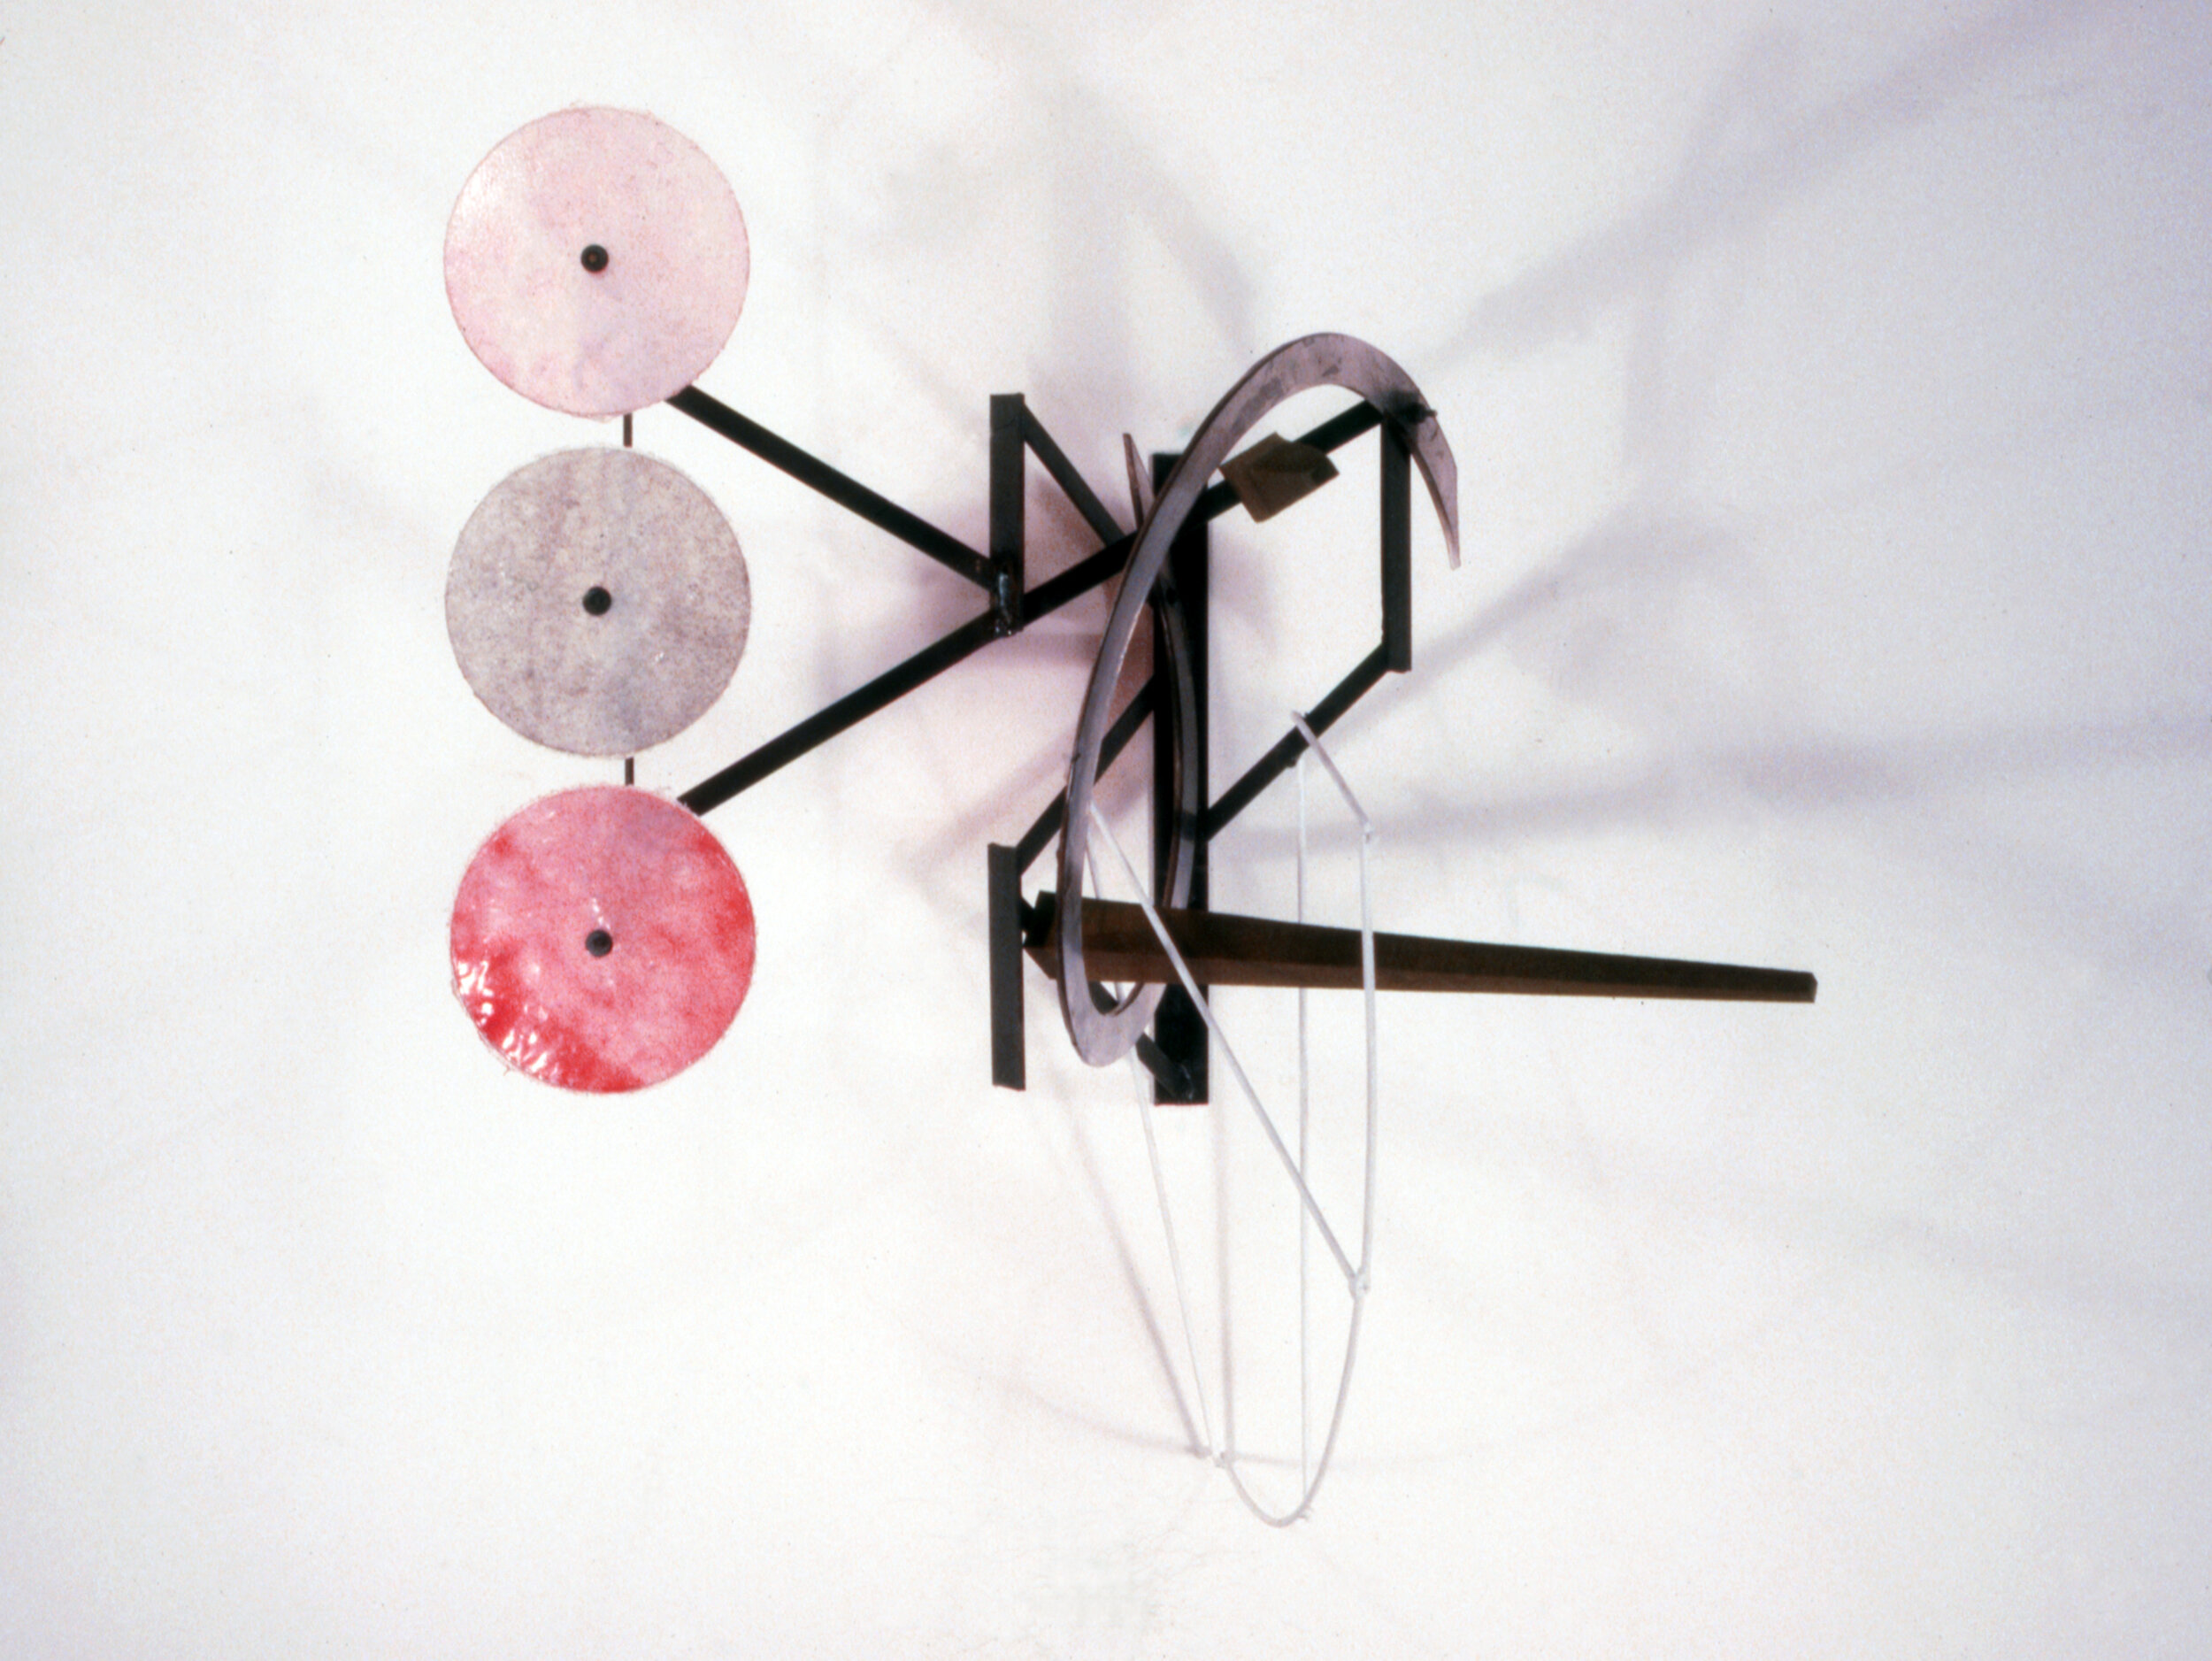  Vector (1999), steel, fiberglass, pigmented resin, and wood, 25 x 23 x 20 inches (65.3 x 58.4 x 50.8 cm) 